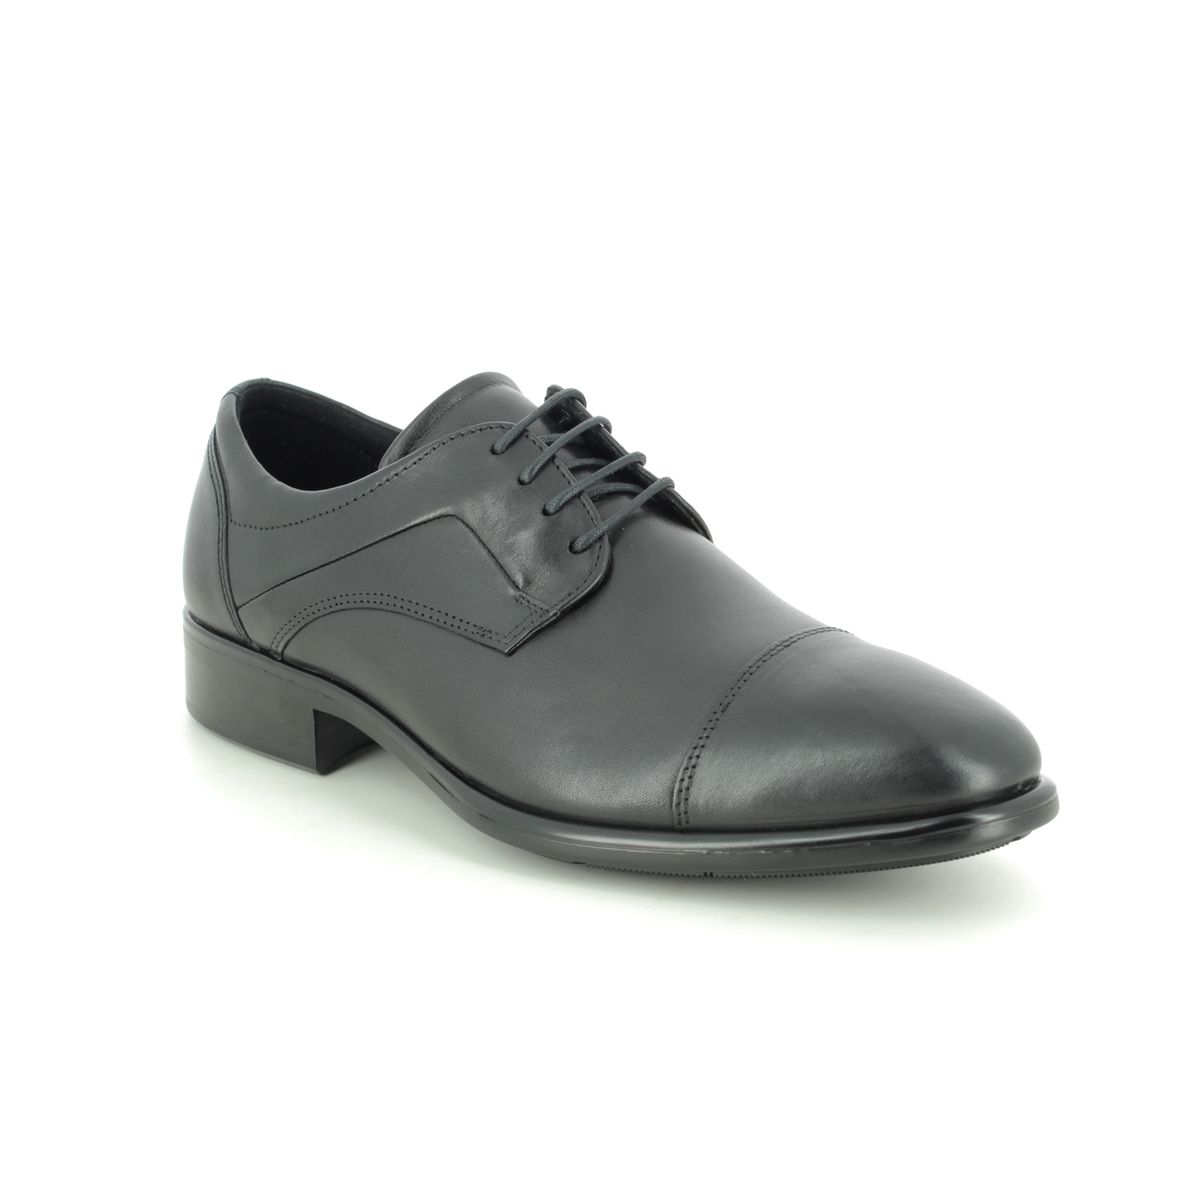 ECCO Citytray Black leather Mens formal shoes 512704-01001